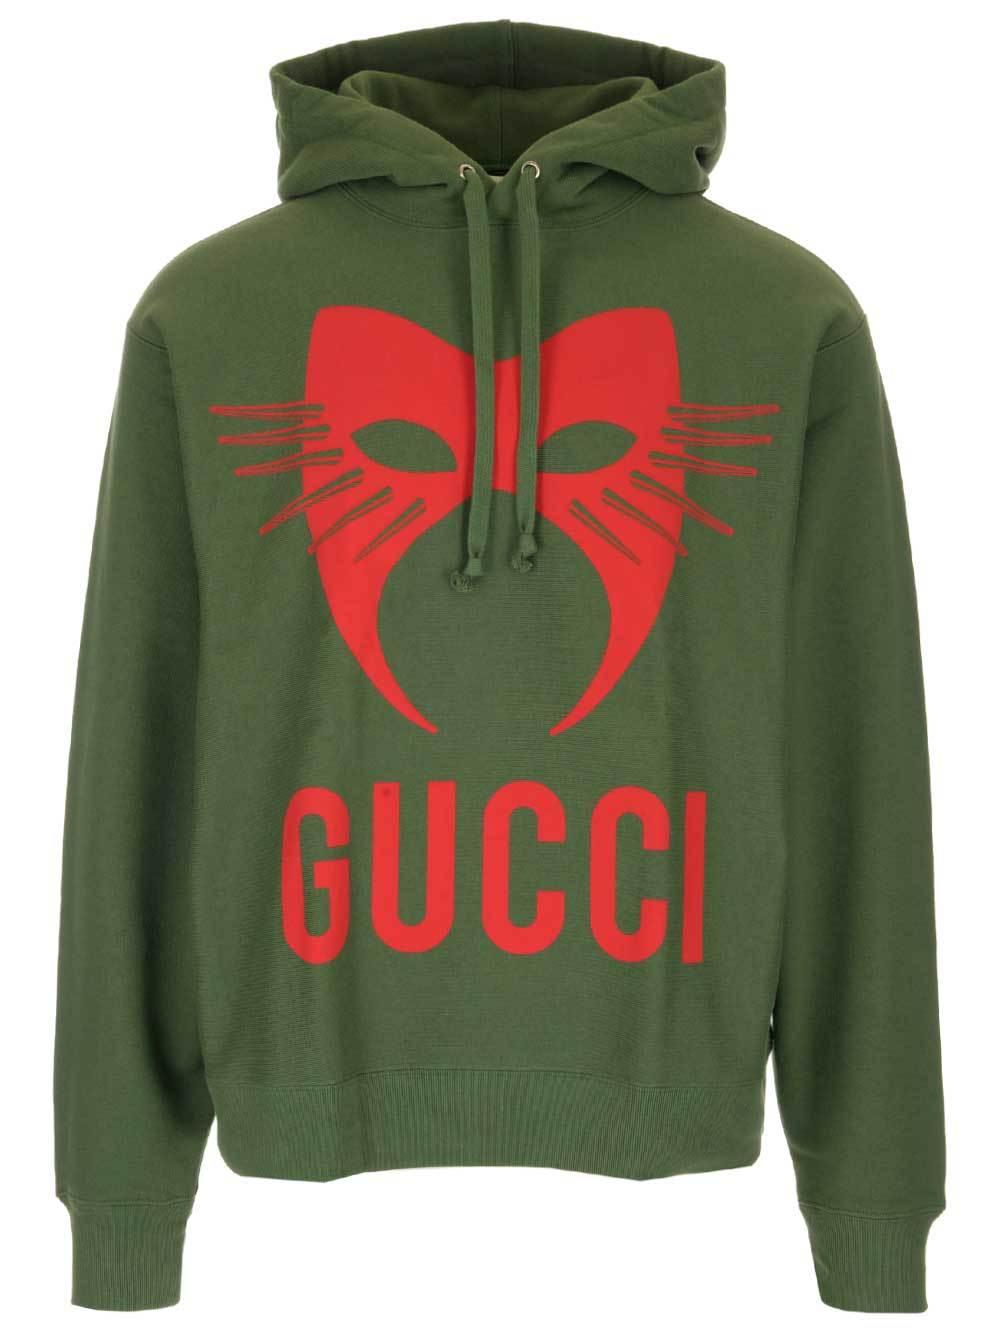 Gucci Cotton Manifesto Logo Printed Hoodie in Green for Men - Lyst